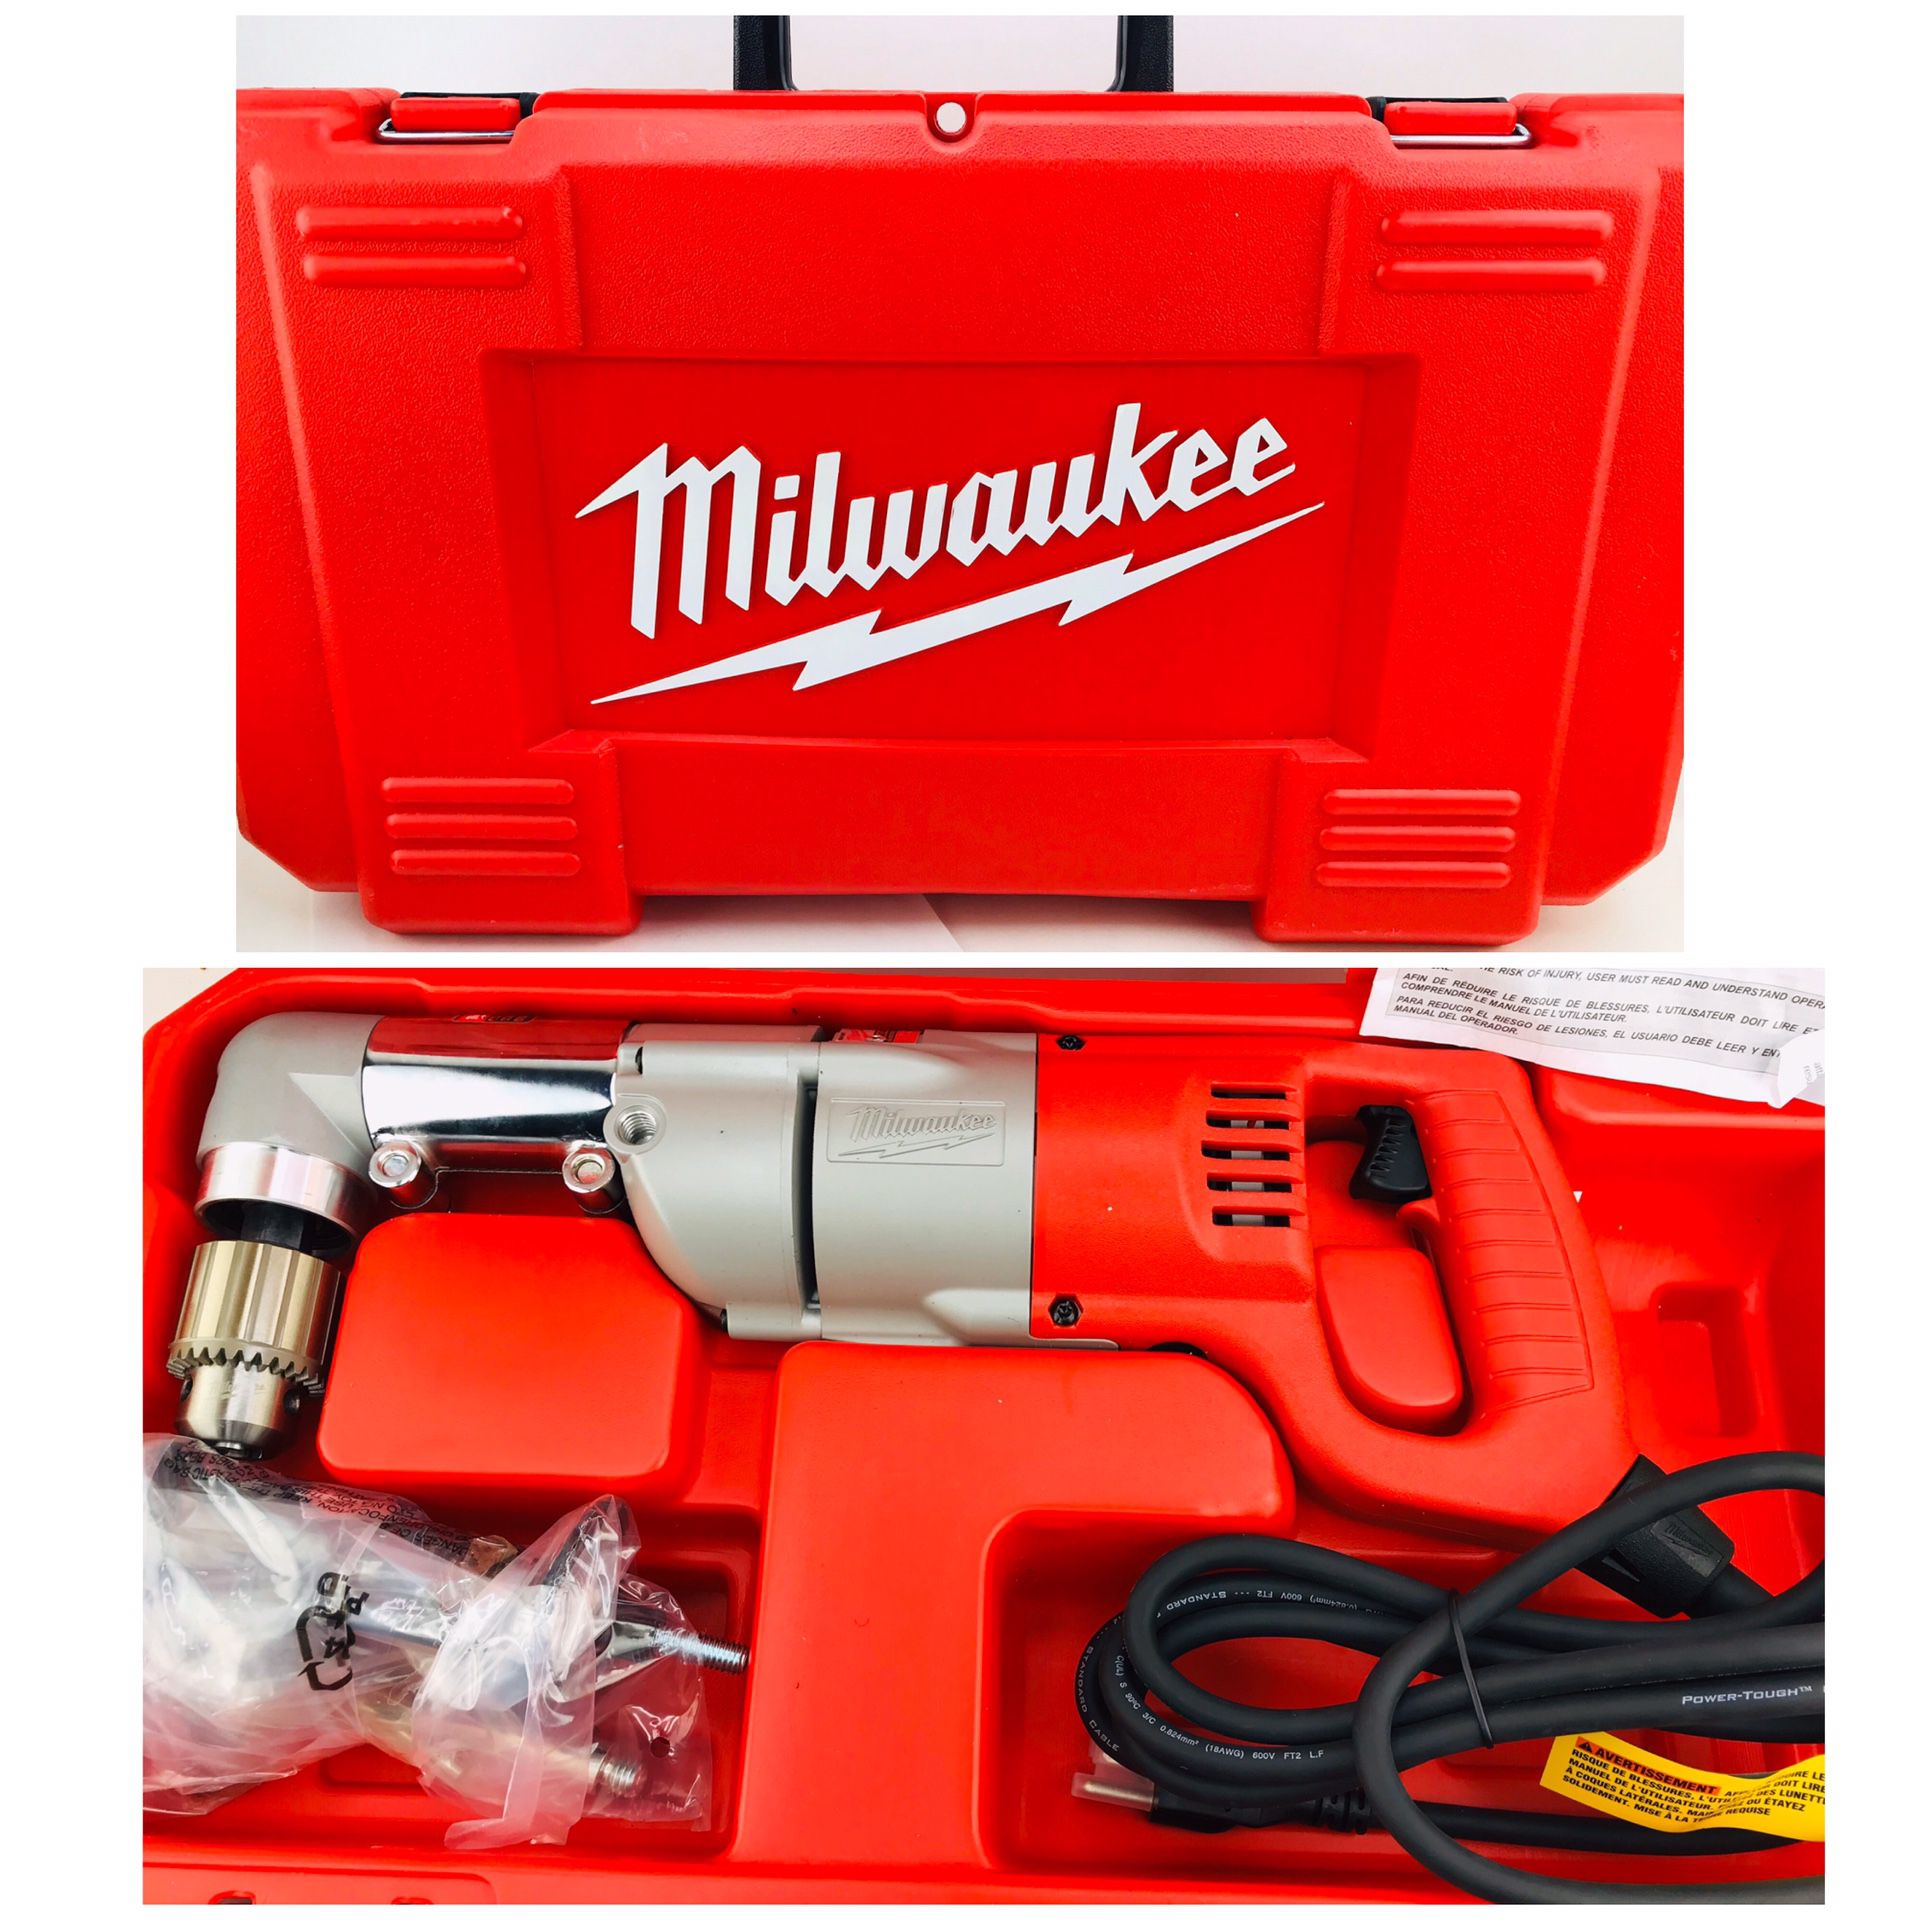 NEW Milwaukee half inch right angle drill electric corded power tool 3107-6